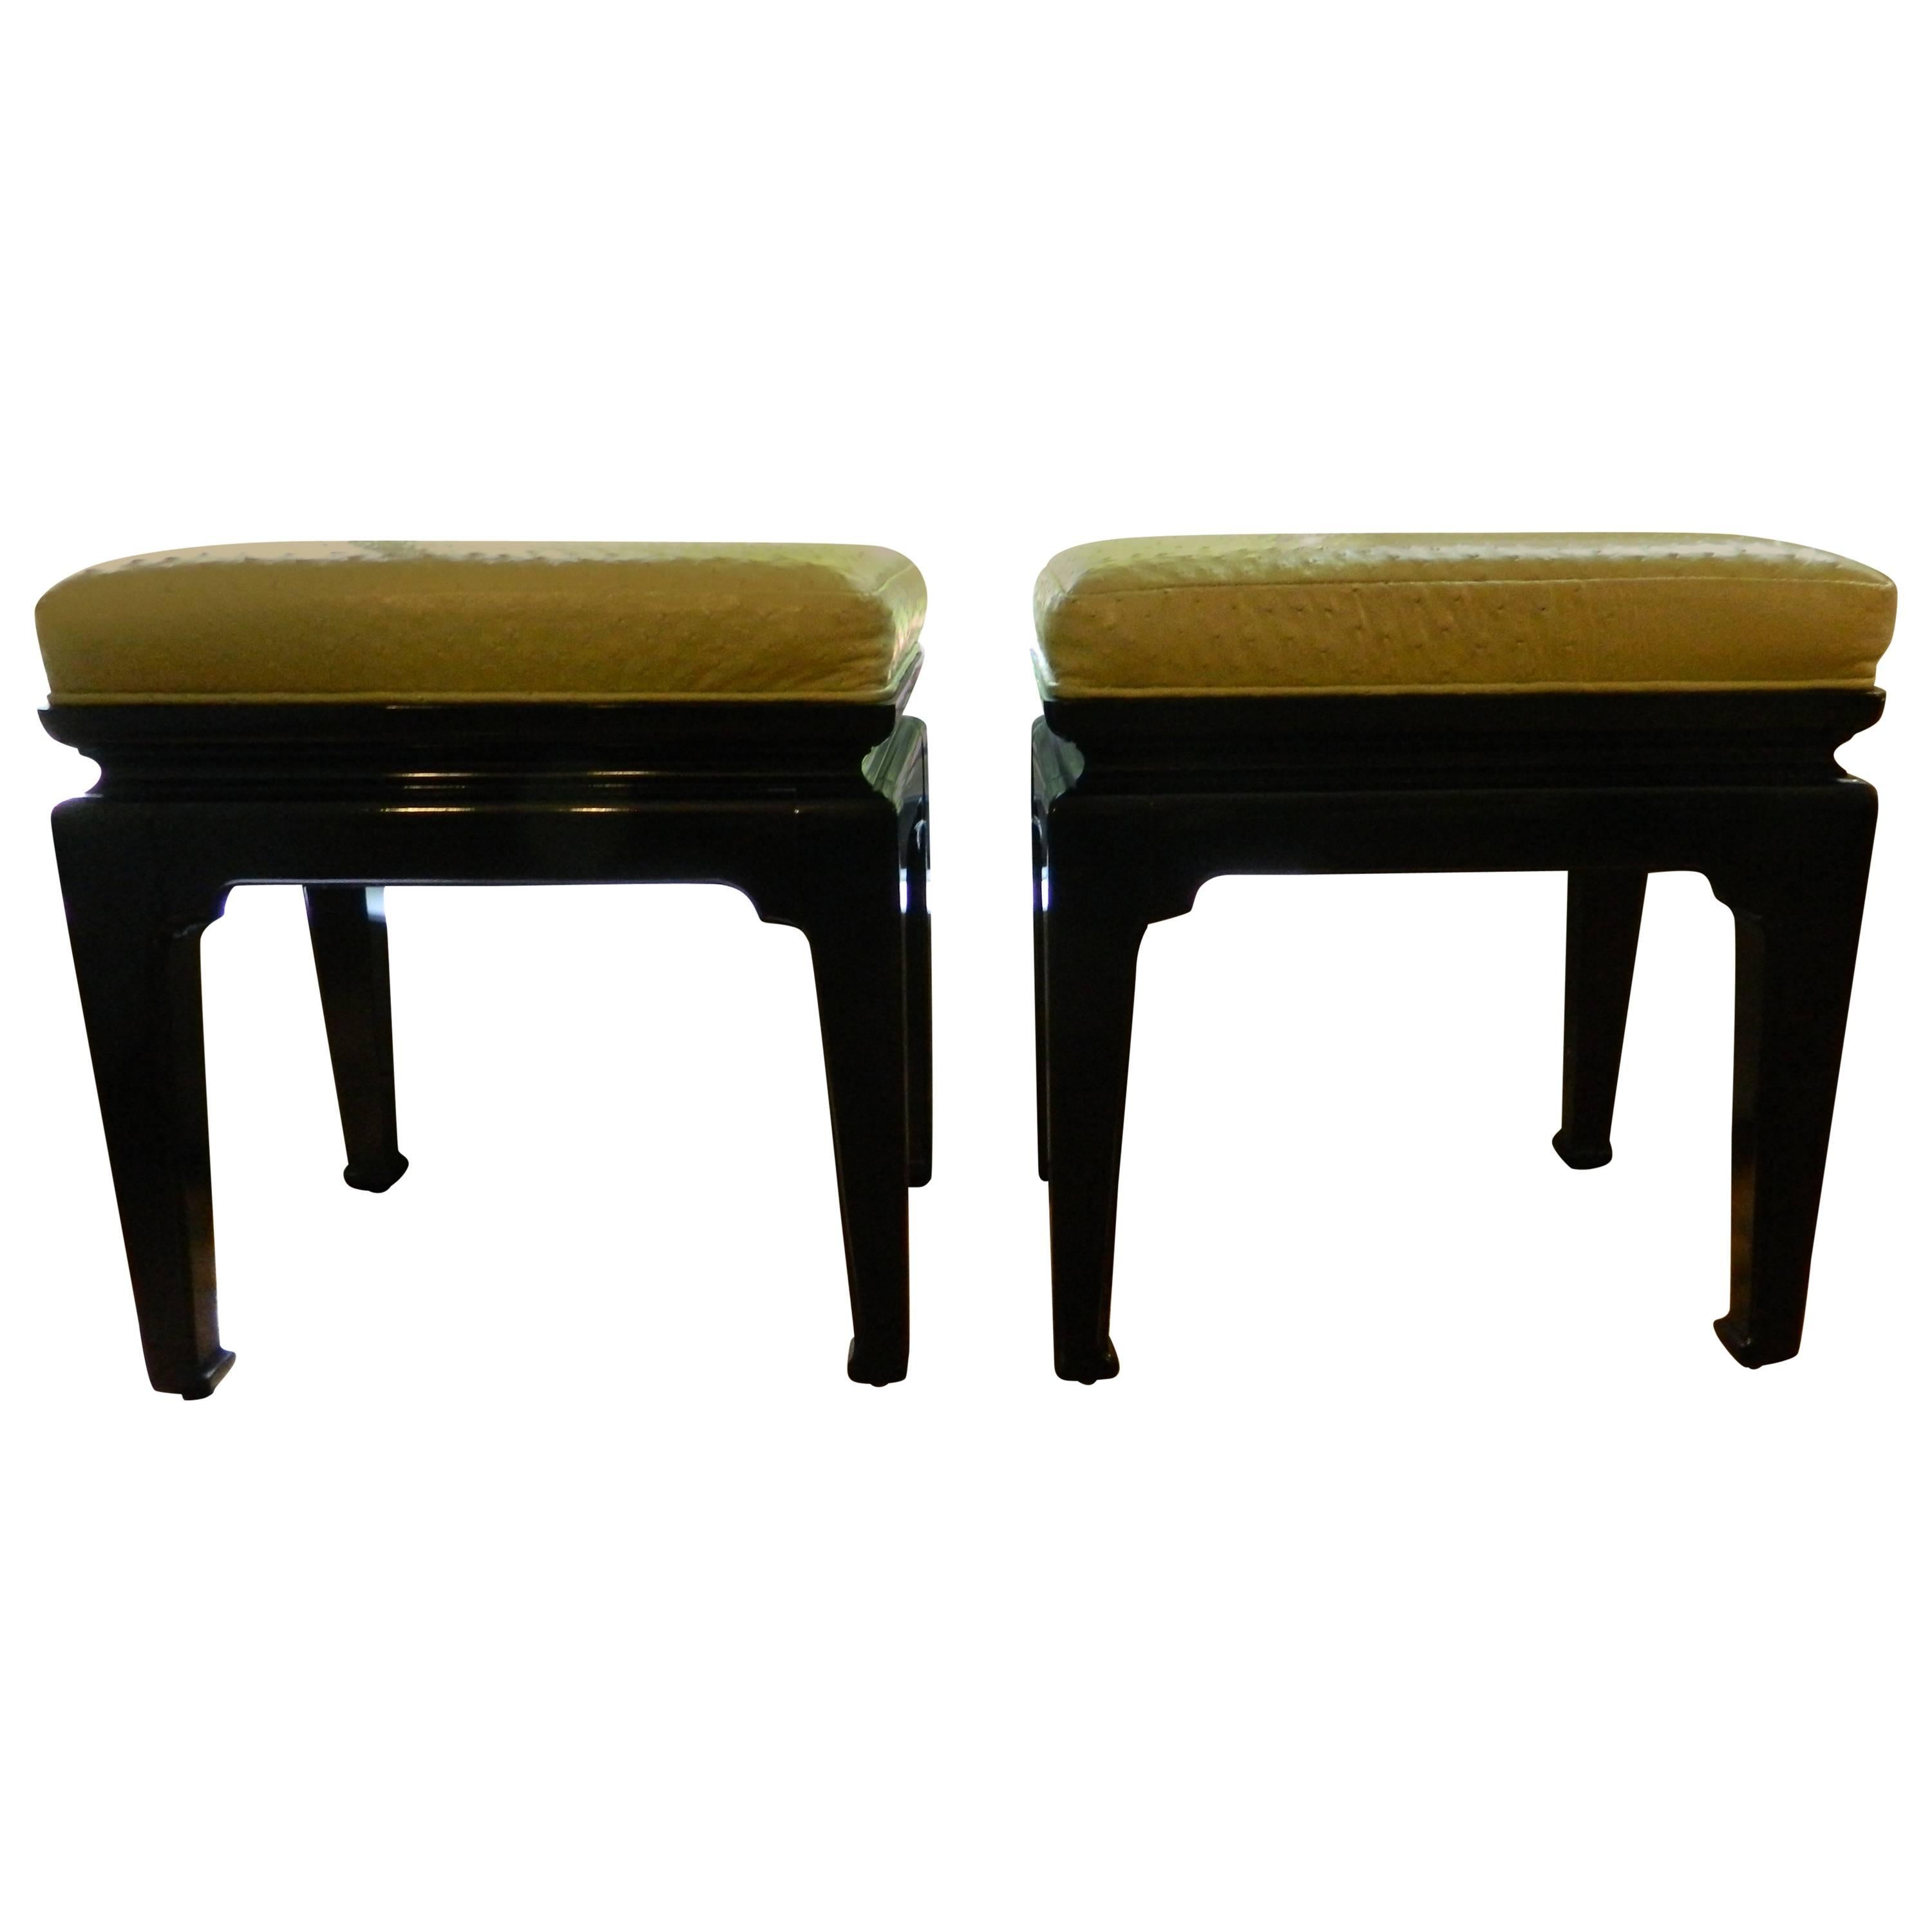 Vintage Chinese Style Lacquered Stools with Genuine Ostrich skin